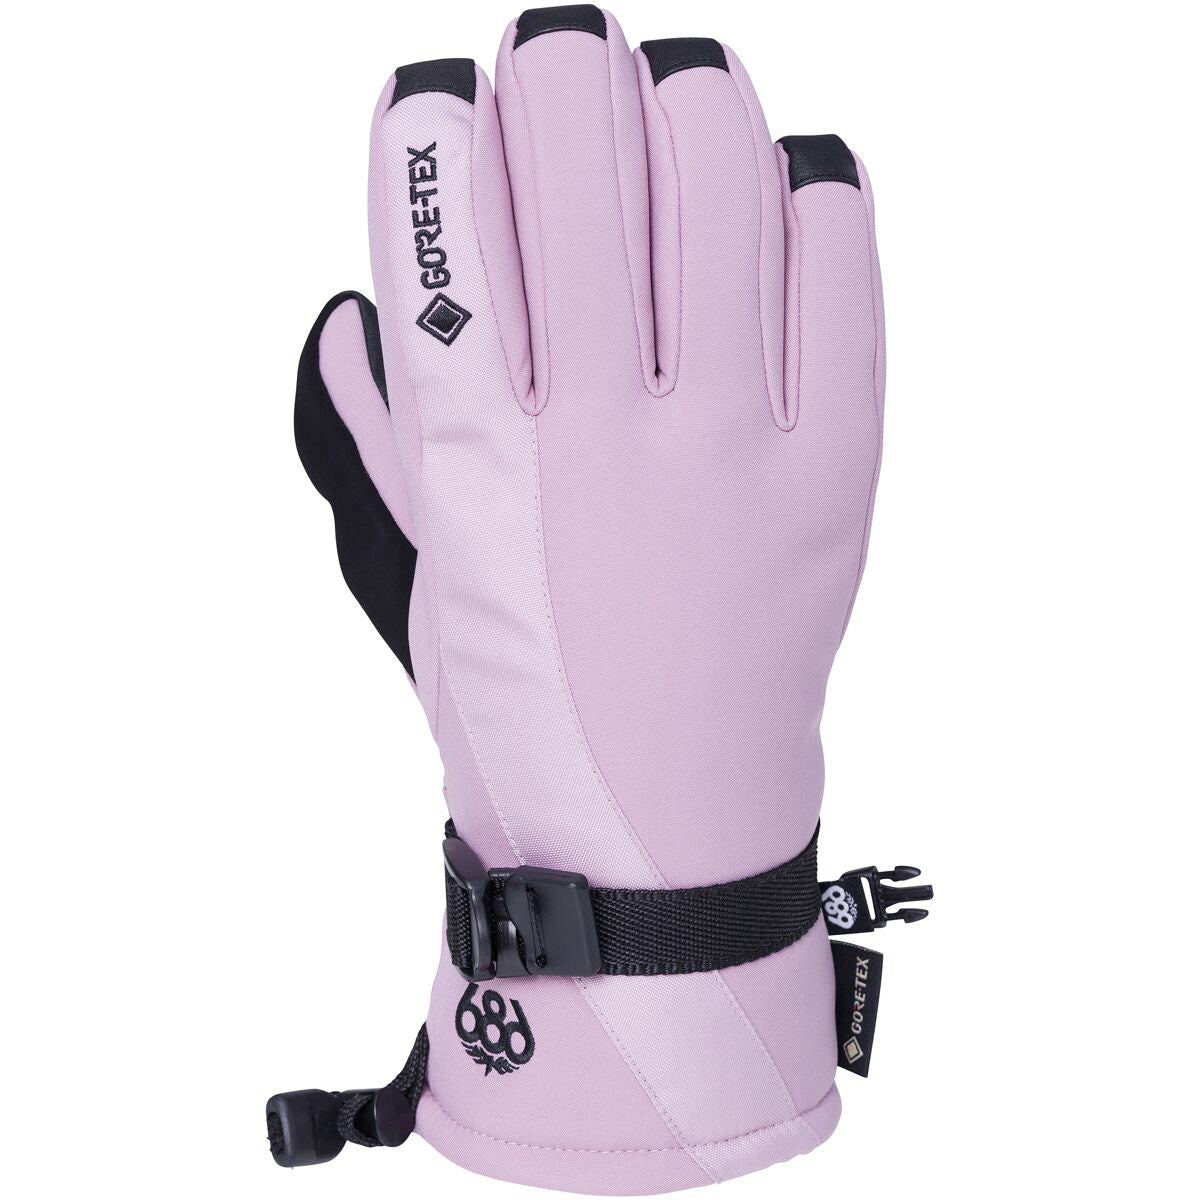 686 Womens Gore-Tex Linear Snowboard Gloves - Dusty Mauve image 1